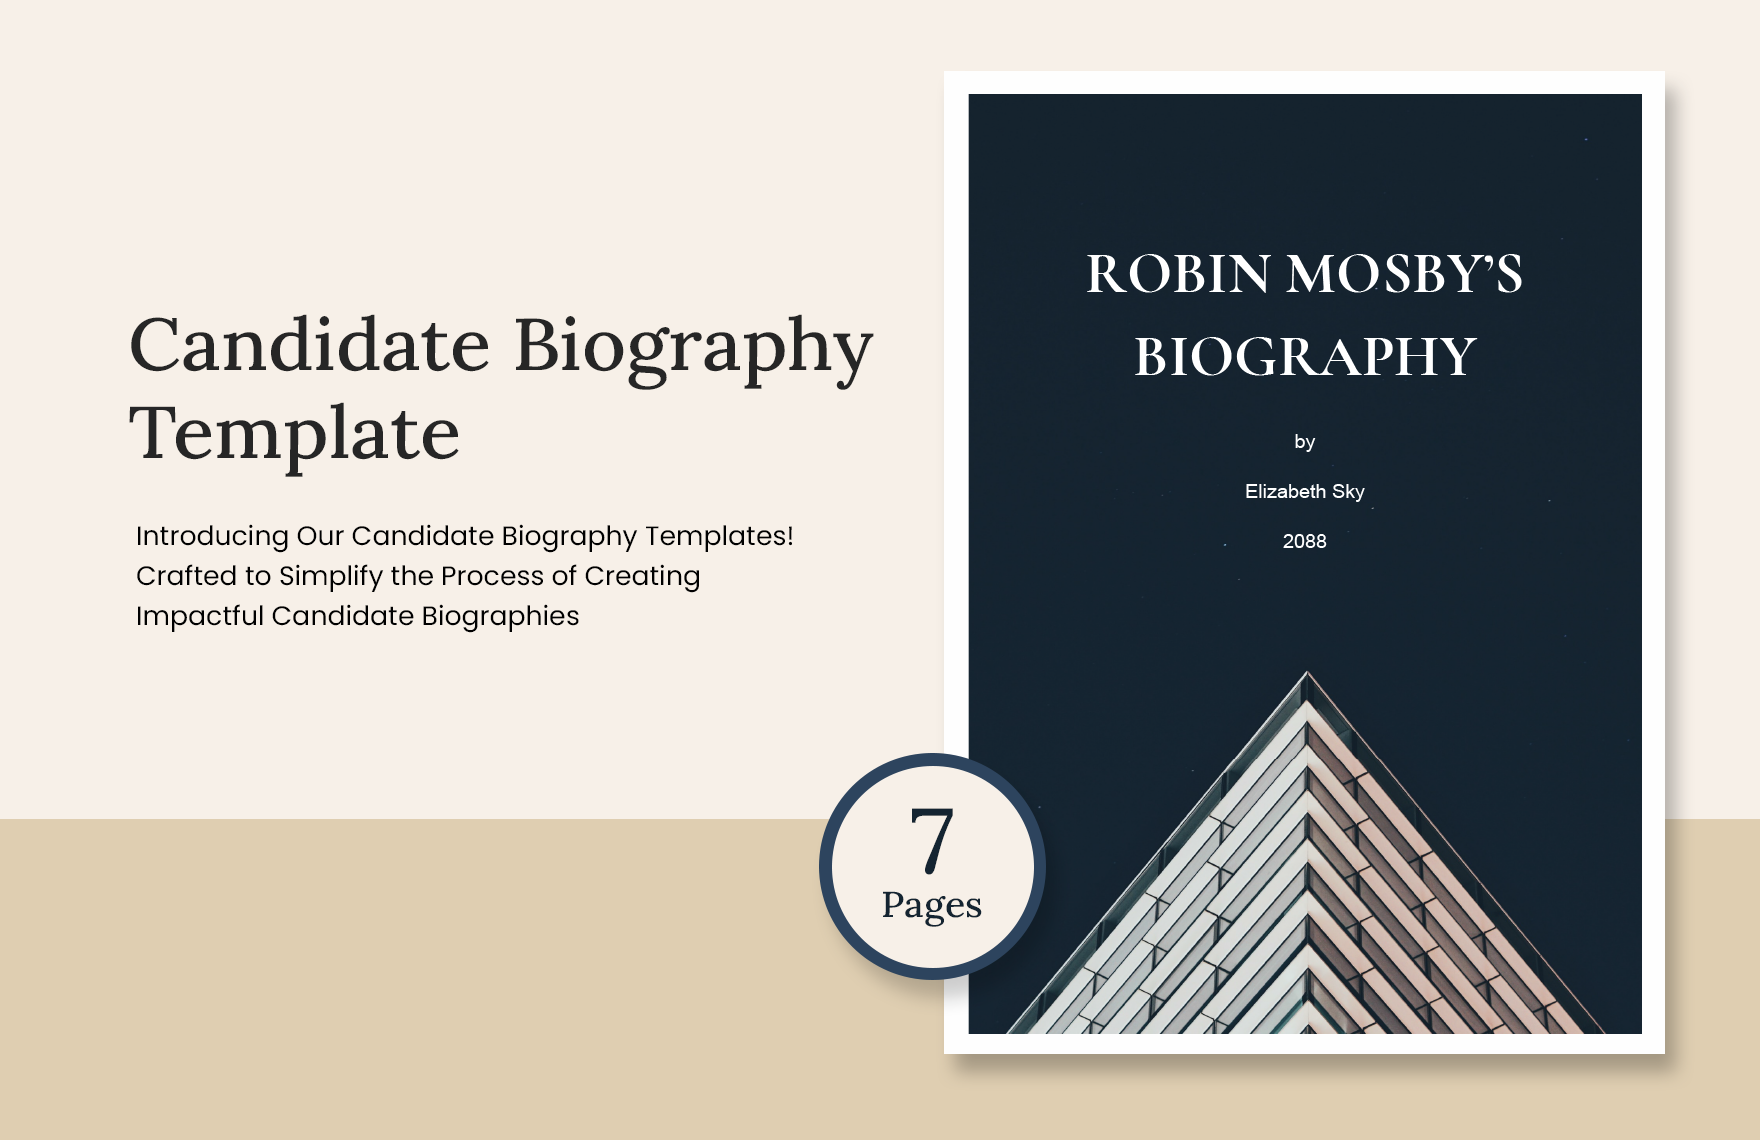 Candidate Biography Template